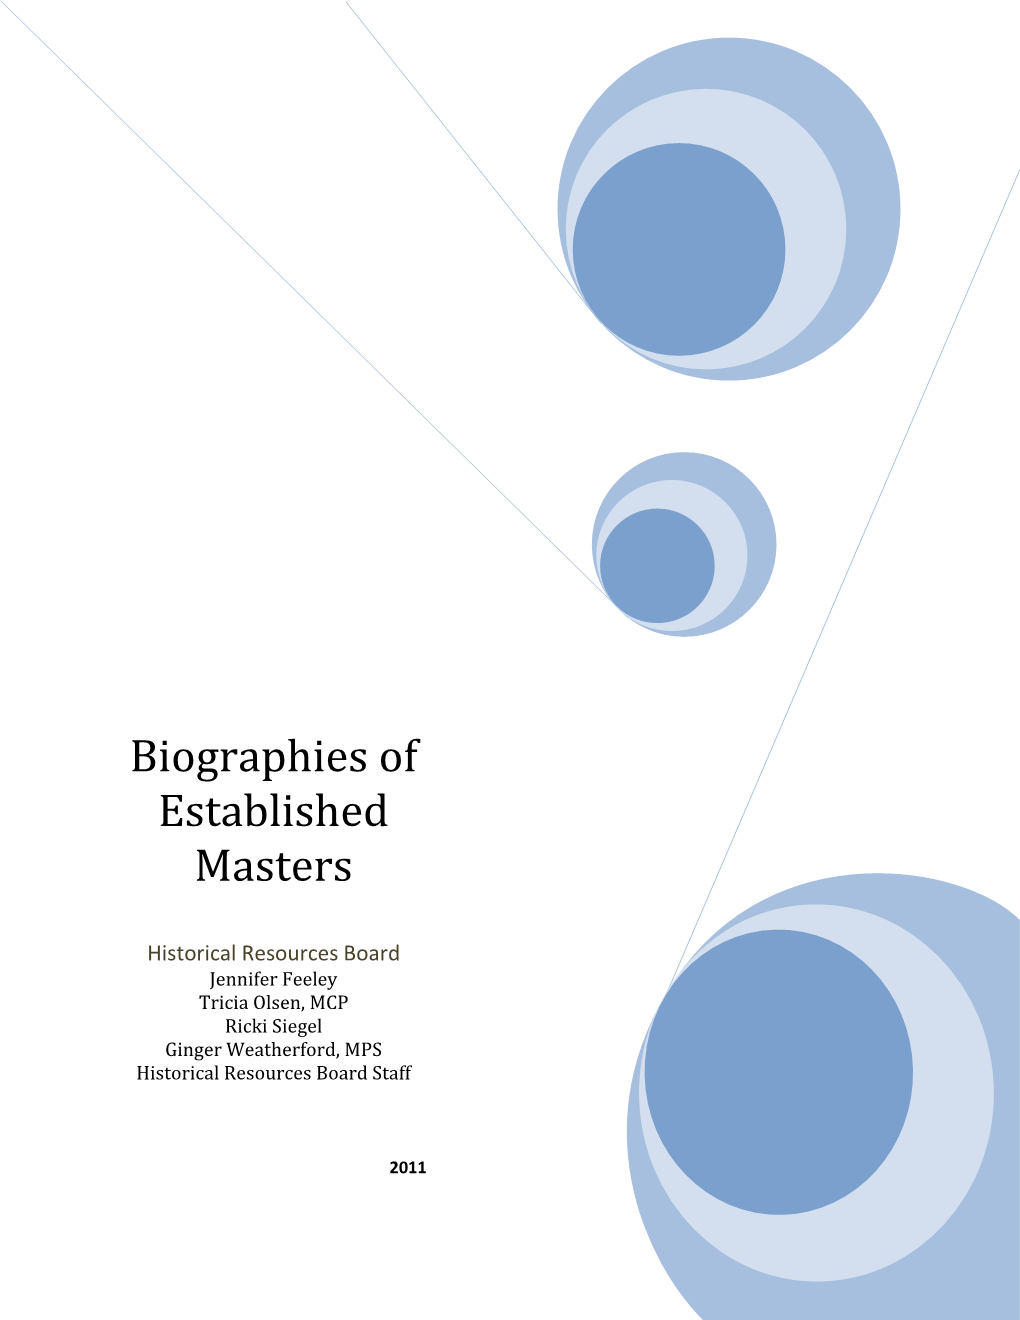 Biographies of Established Masters